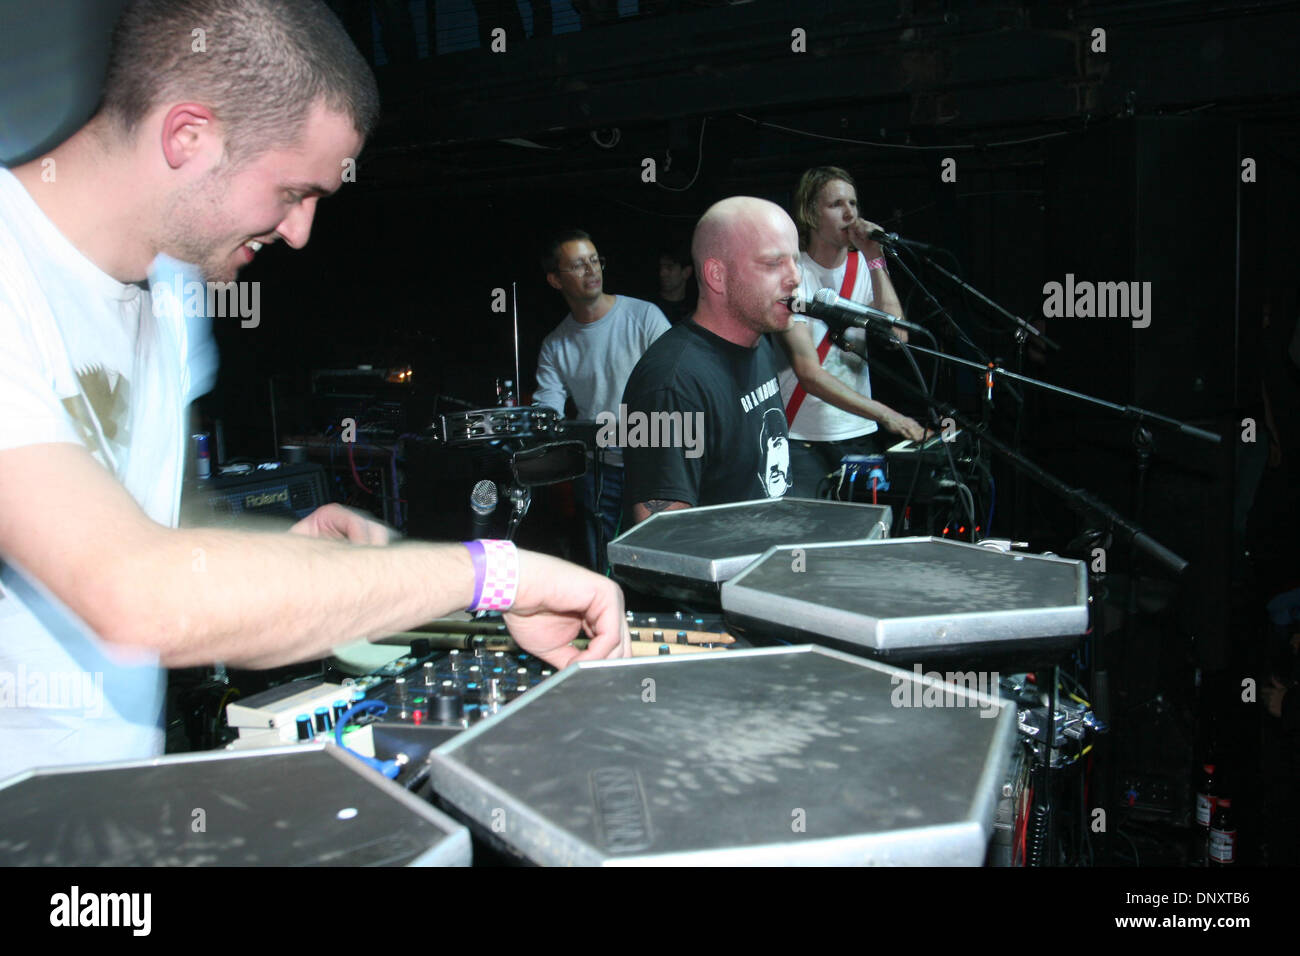 Dec 30, 2005; New York, NY, US; JJohn MaClean (bald) aka Juan Maclean performing with his band at Avalon on Friday night December 30, 2005. Nick is on the drum pads, Jerry on snare drums and cymbals, Eric is playing Theremin. Mandatory Credit: Photo by Aviv Small/ZUMA Press. (©) Copyright 2005 by Aviv Small Stock Photo